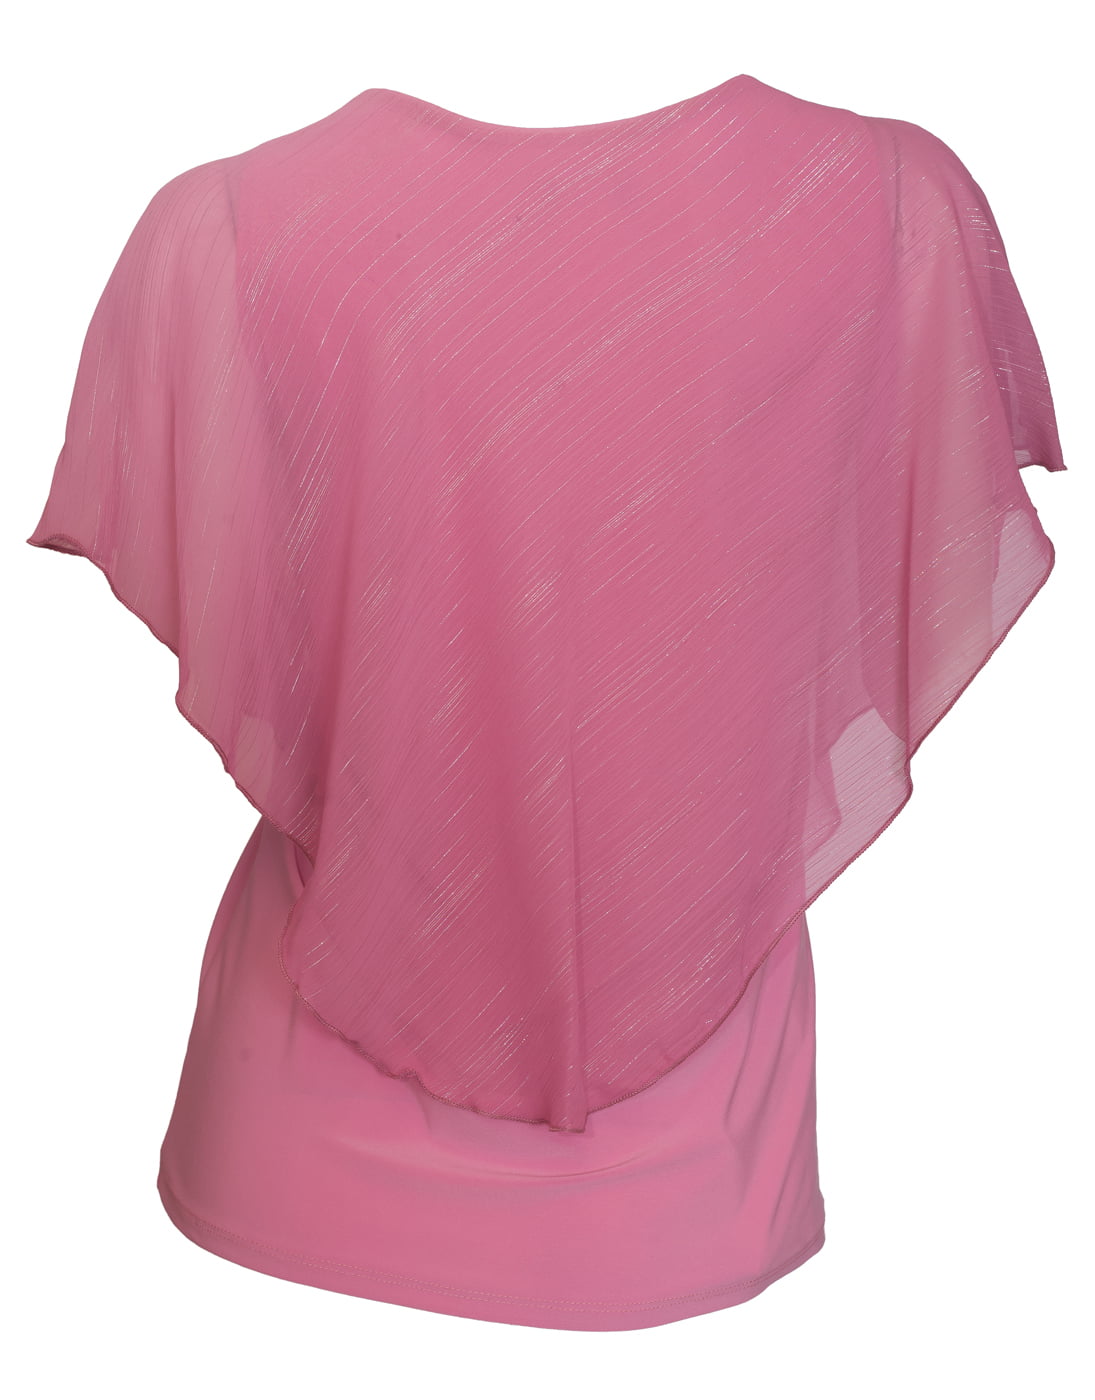 eVogues Plus Size Layered Poncho Top with Pearl Pendant Pink Glitter Stripe  18223